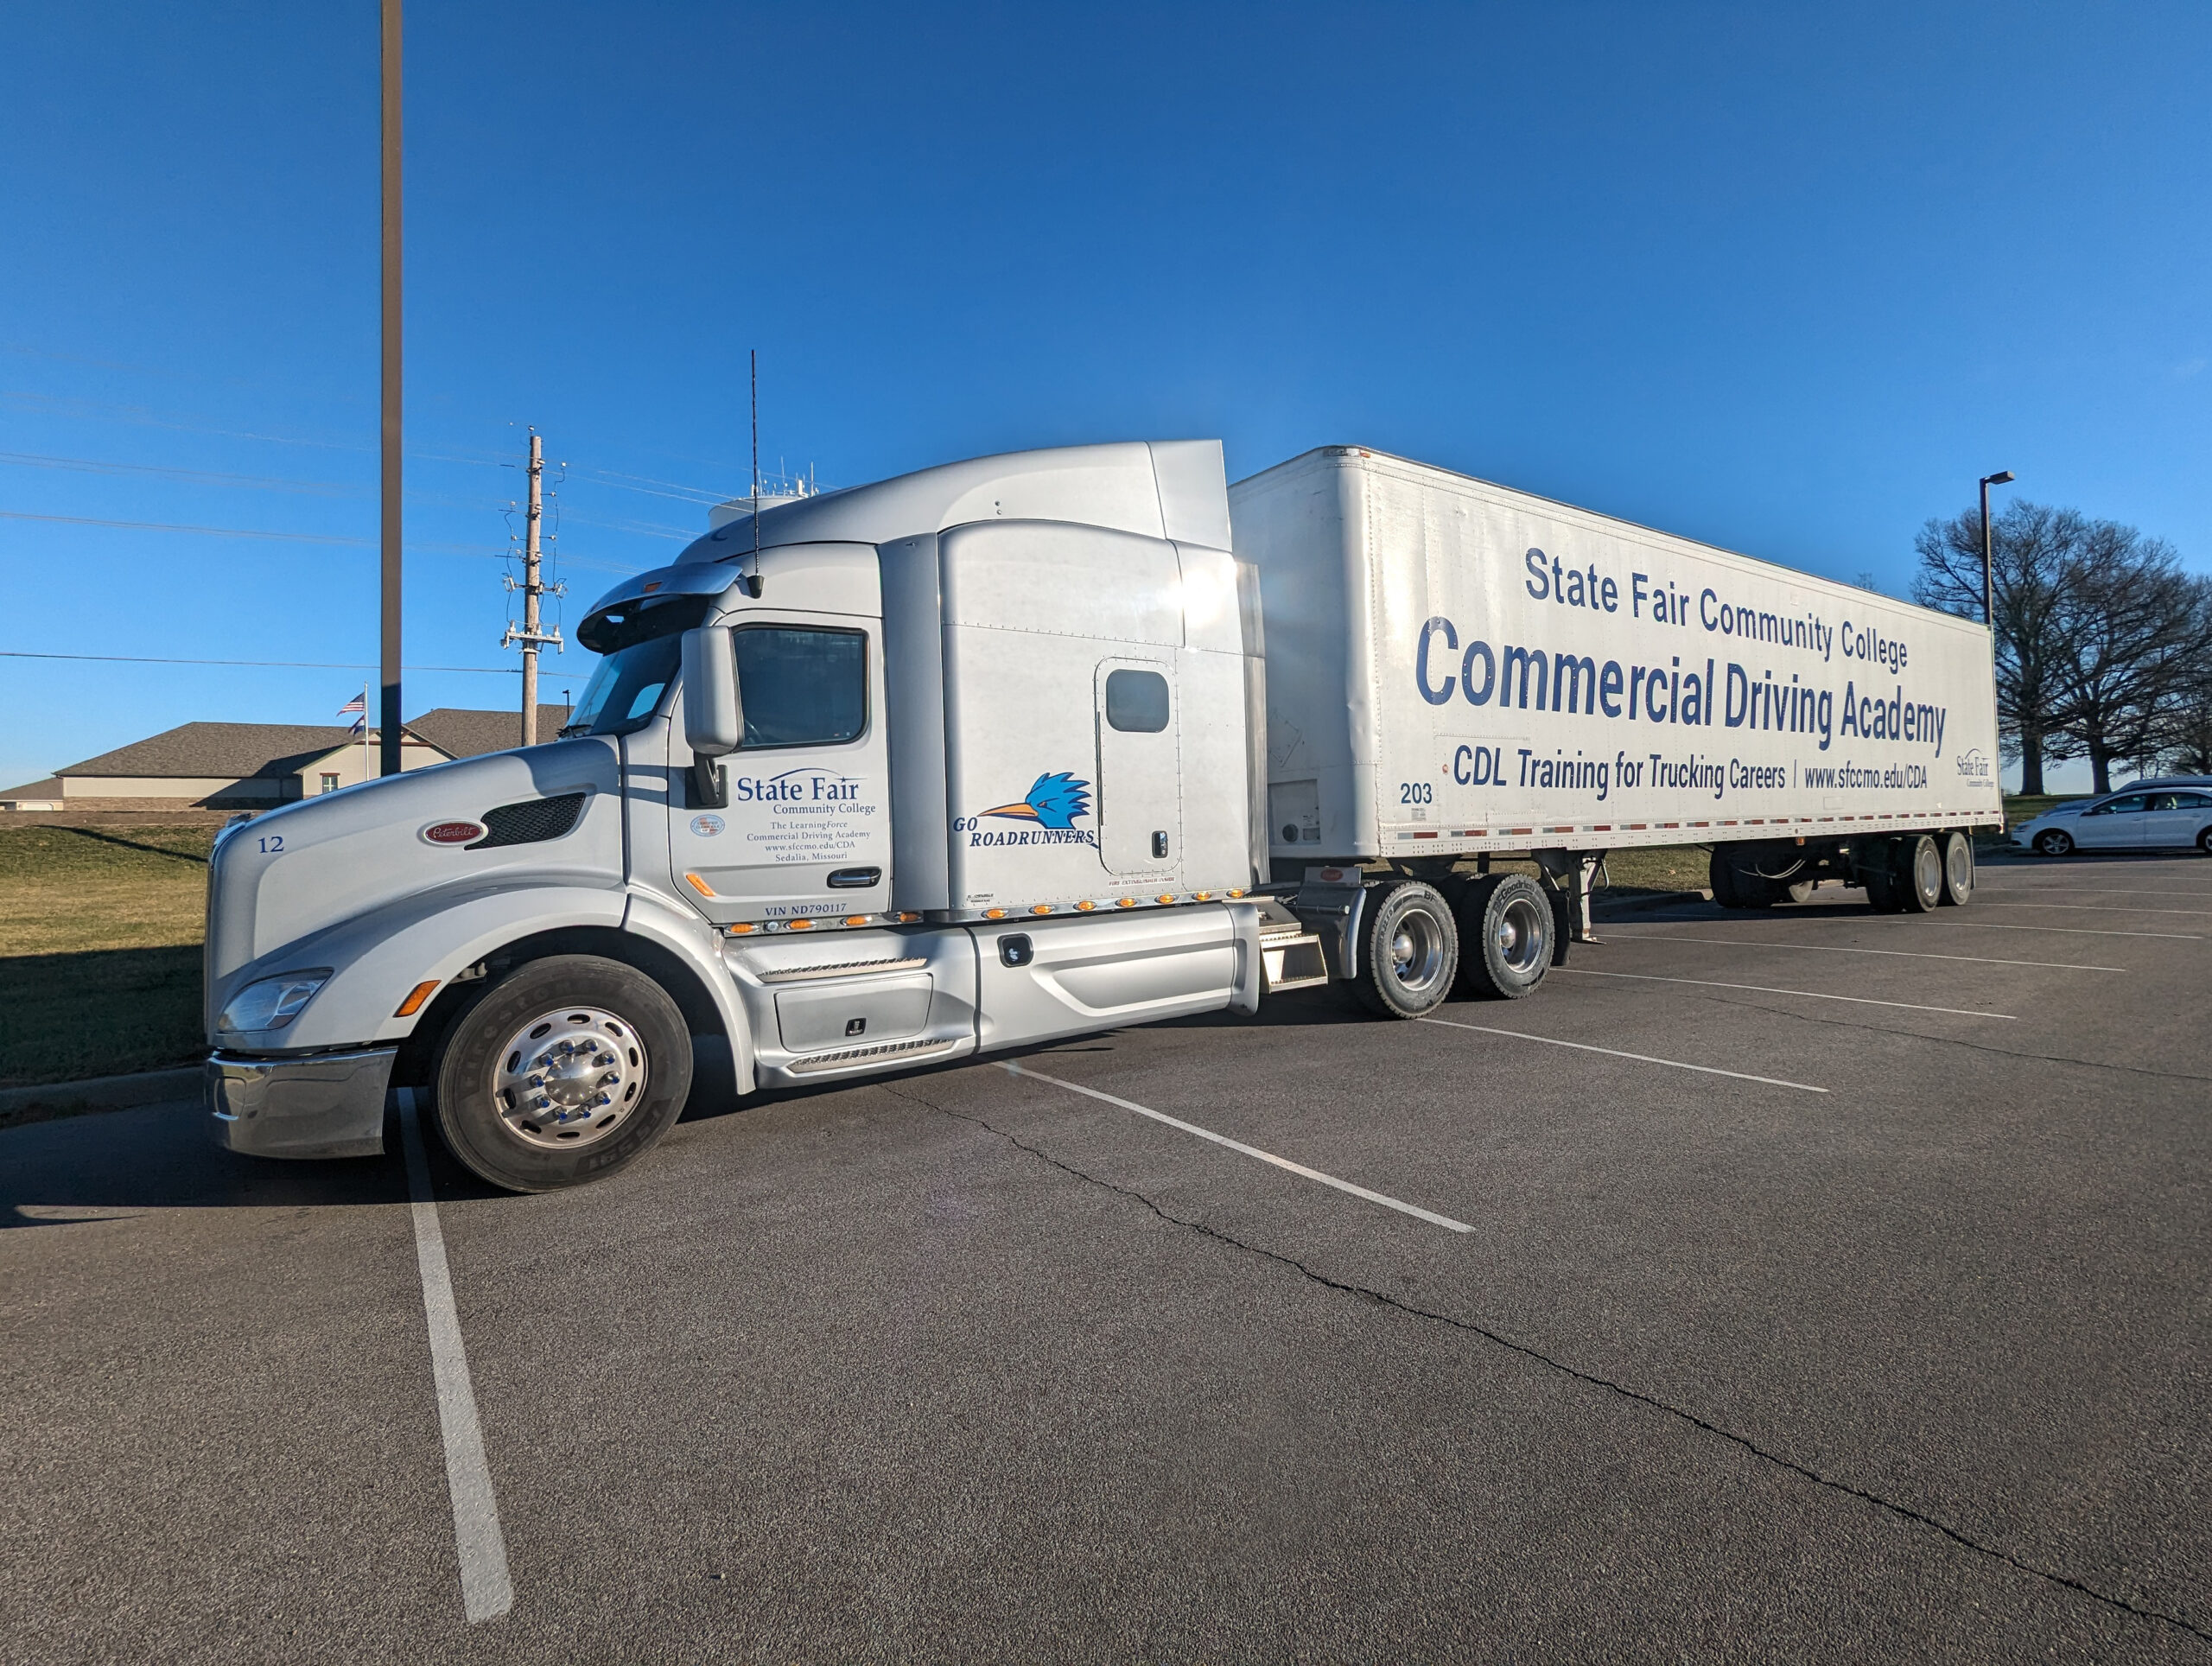 Commercial Driving Academy - State Fair Community College